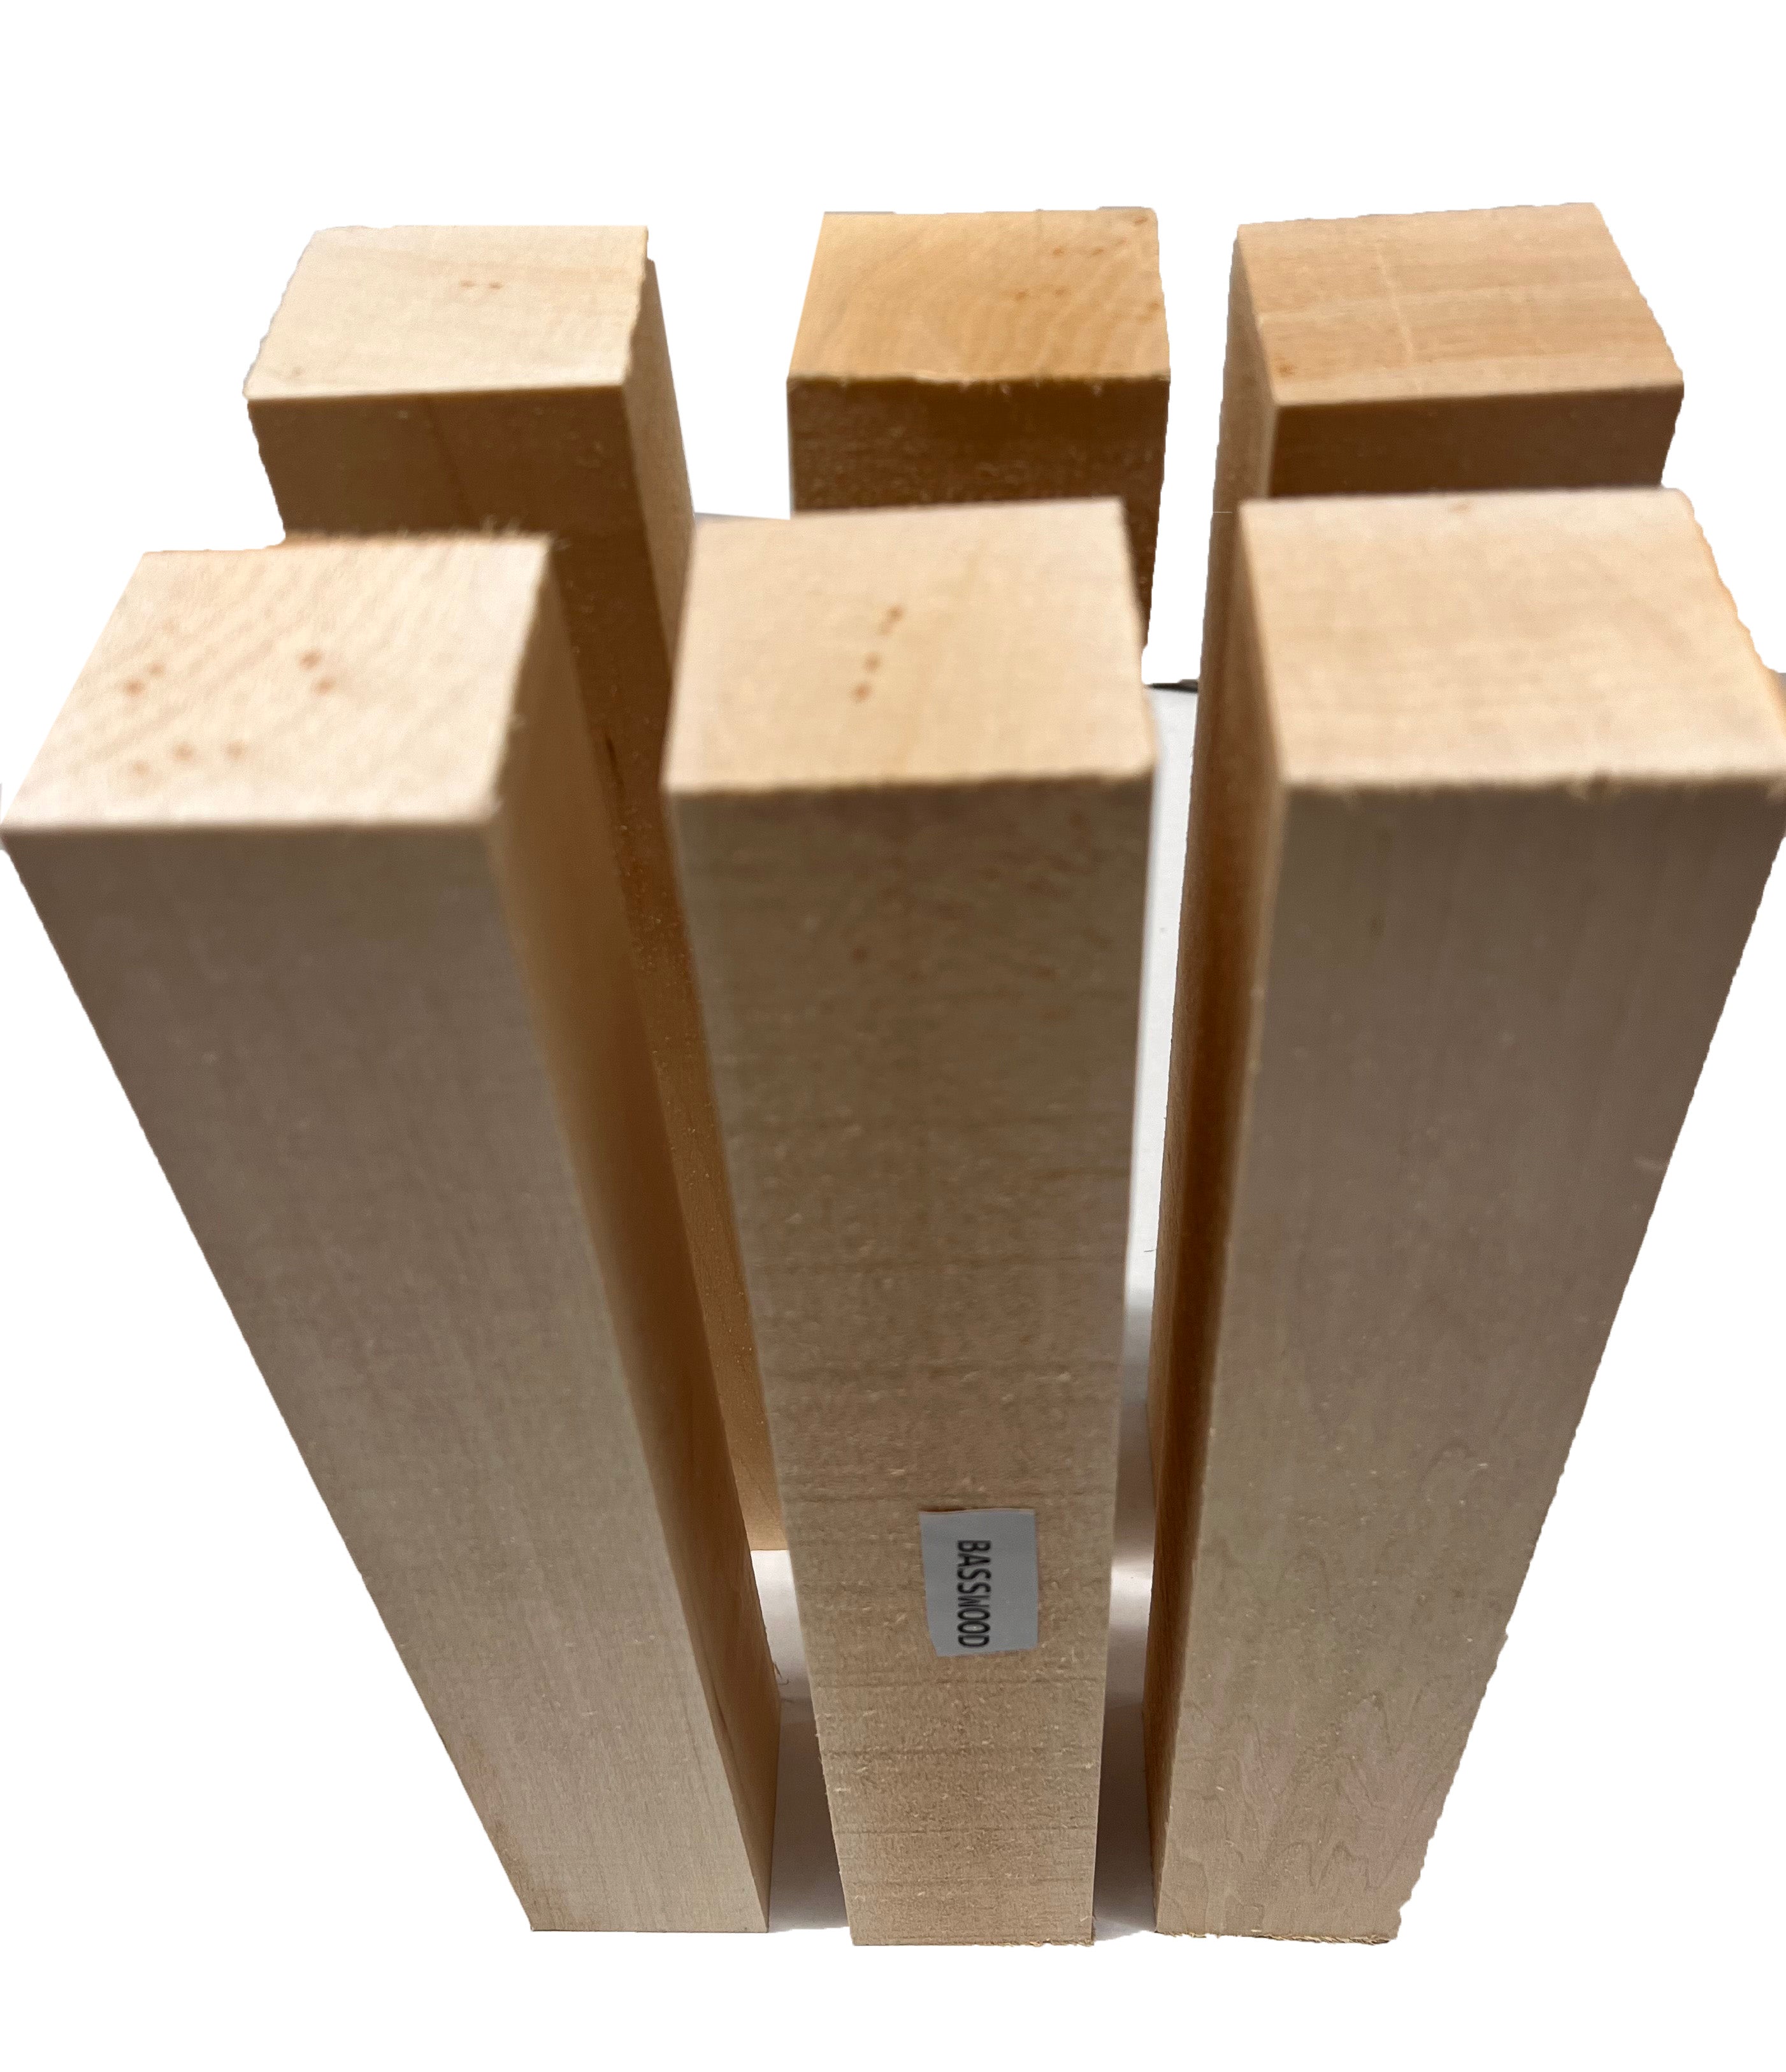 2 Inch Basswood Carving Blocks - 4 Inch Lengths - Arrowhead Wood Products